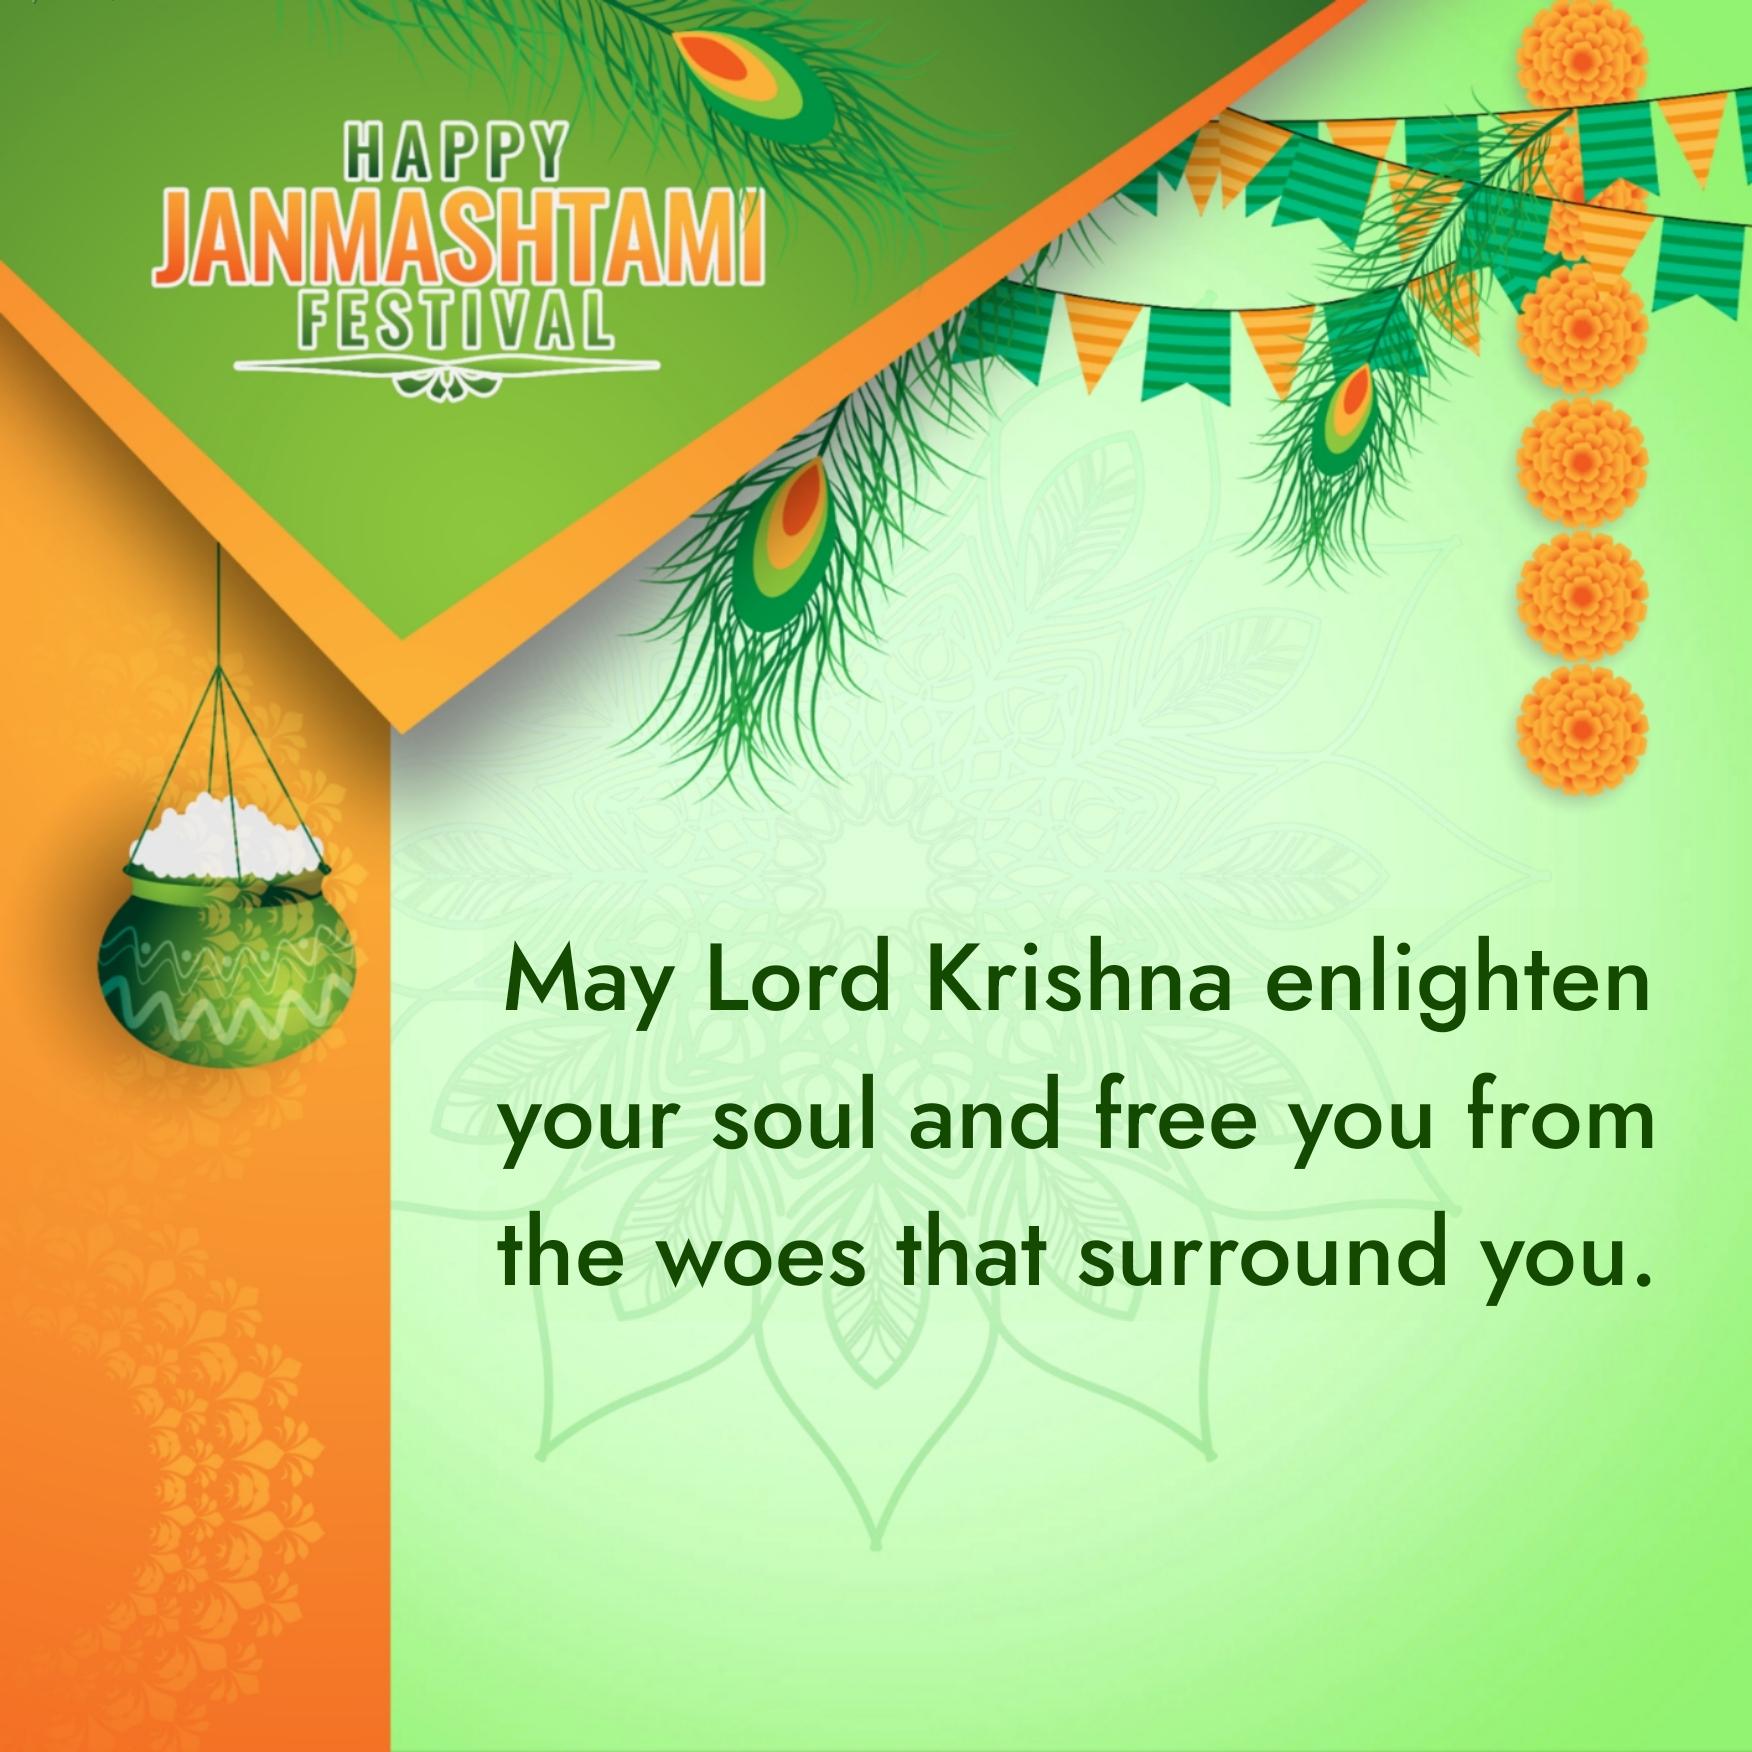 May Lord Krishna enlighten your soul and free you from the woes